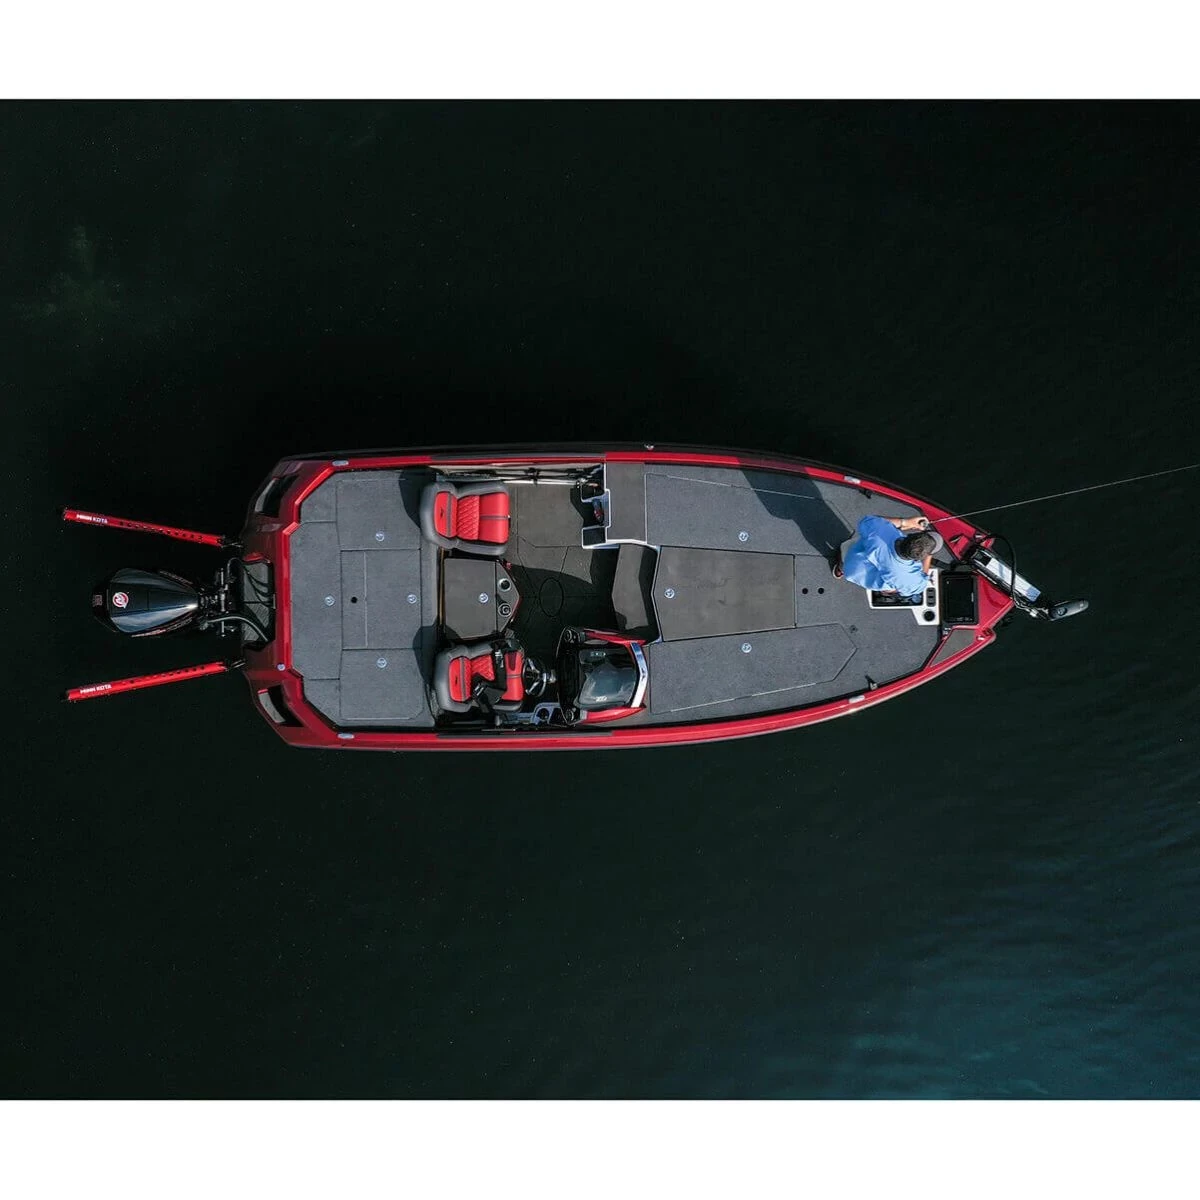 Aerial shot of Raptors anchoring a bass boat